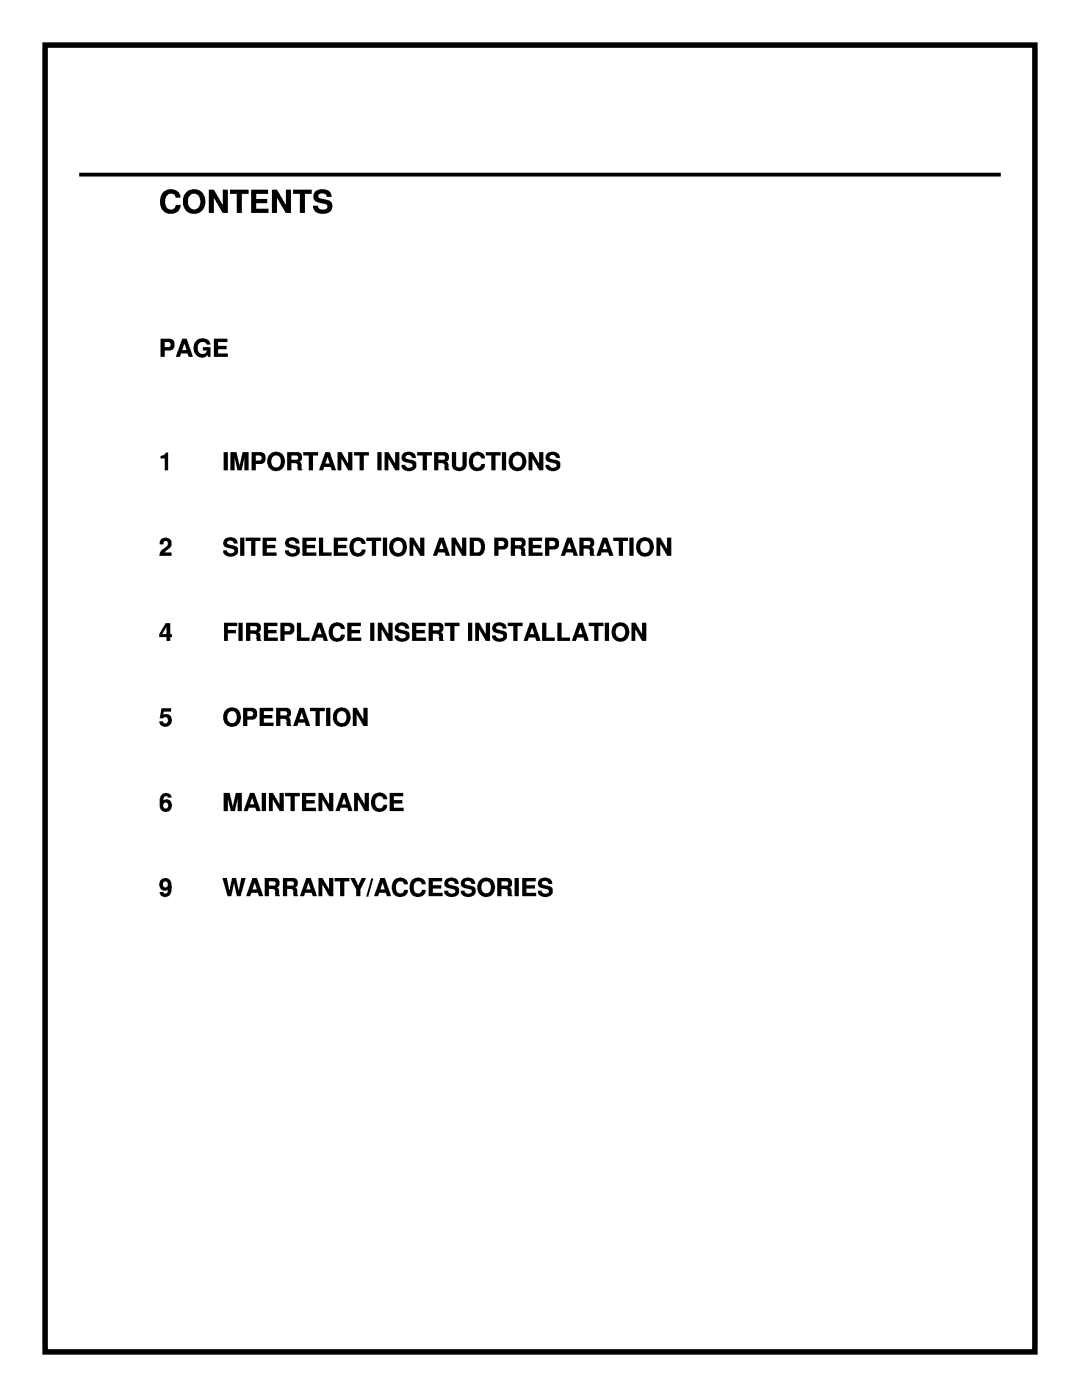 Dimplex DF2603 manual Contents, PAGE 1IMPORTANT INSTRUCTIONS, 2SITE SELECTION AND PREPARATION 